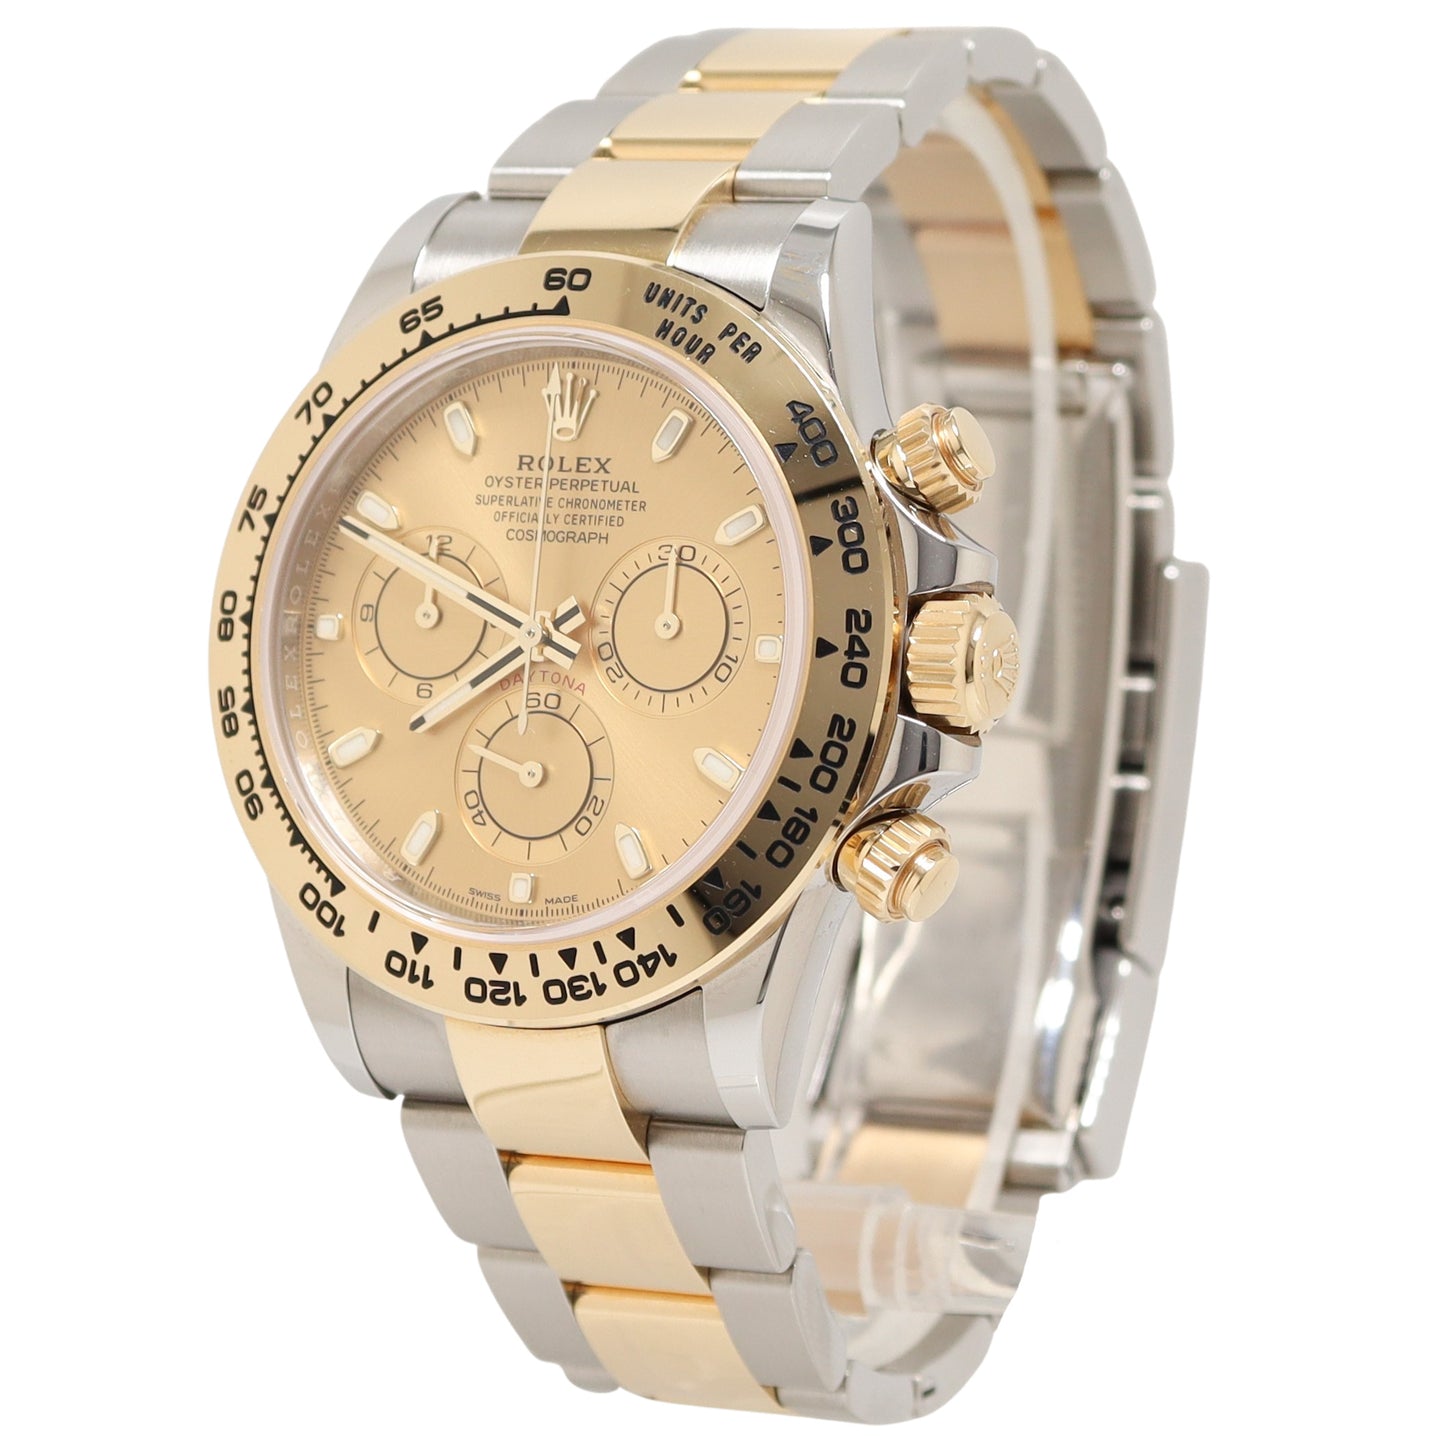 Rolex Daytona Two Tone Yellow Gold & Steel 40mm Champagne Chronograph Dial Watch Reference #: 116503